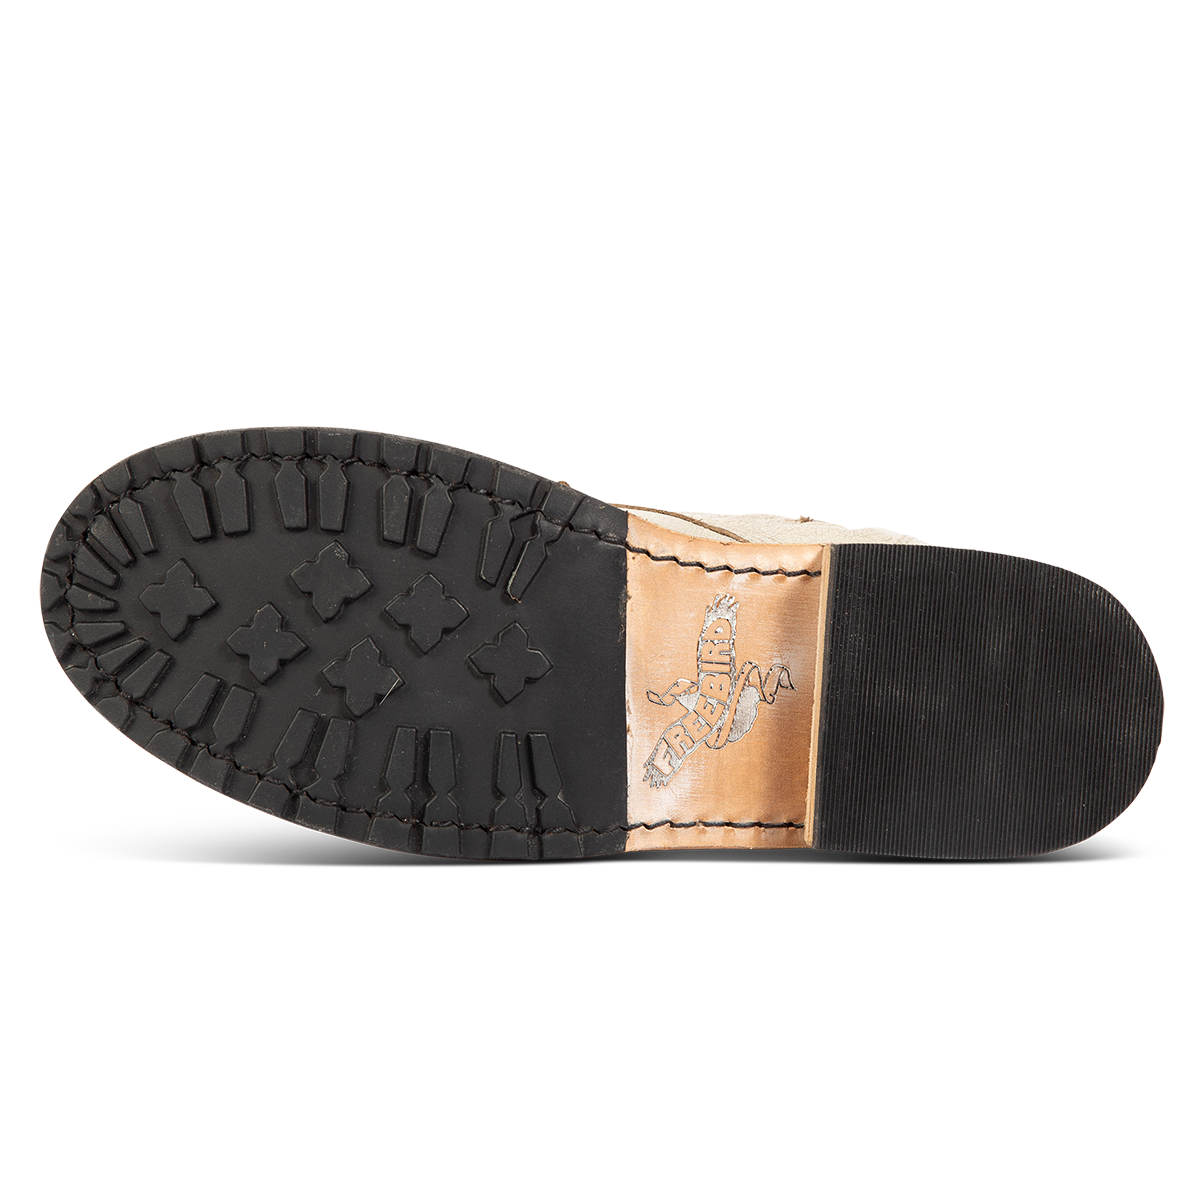 Rubber tread sole imprinted with FREEBIRD on women's Manchester taupe distressed combat boot